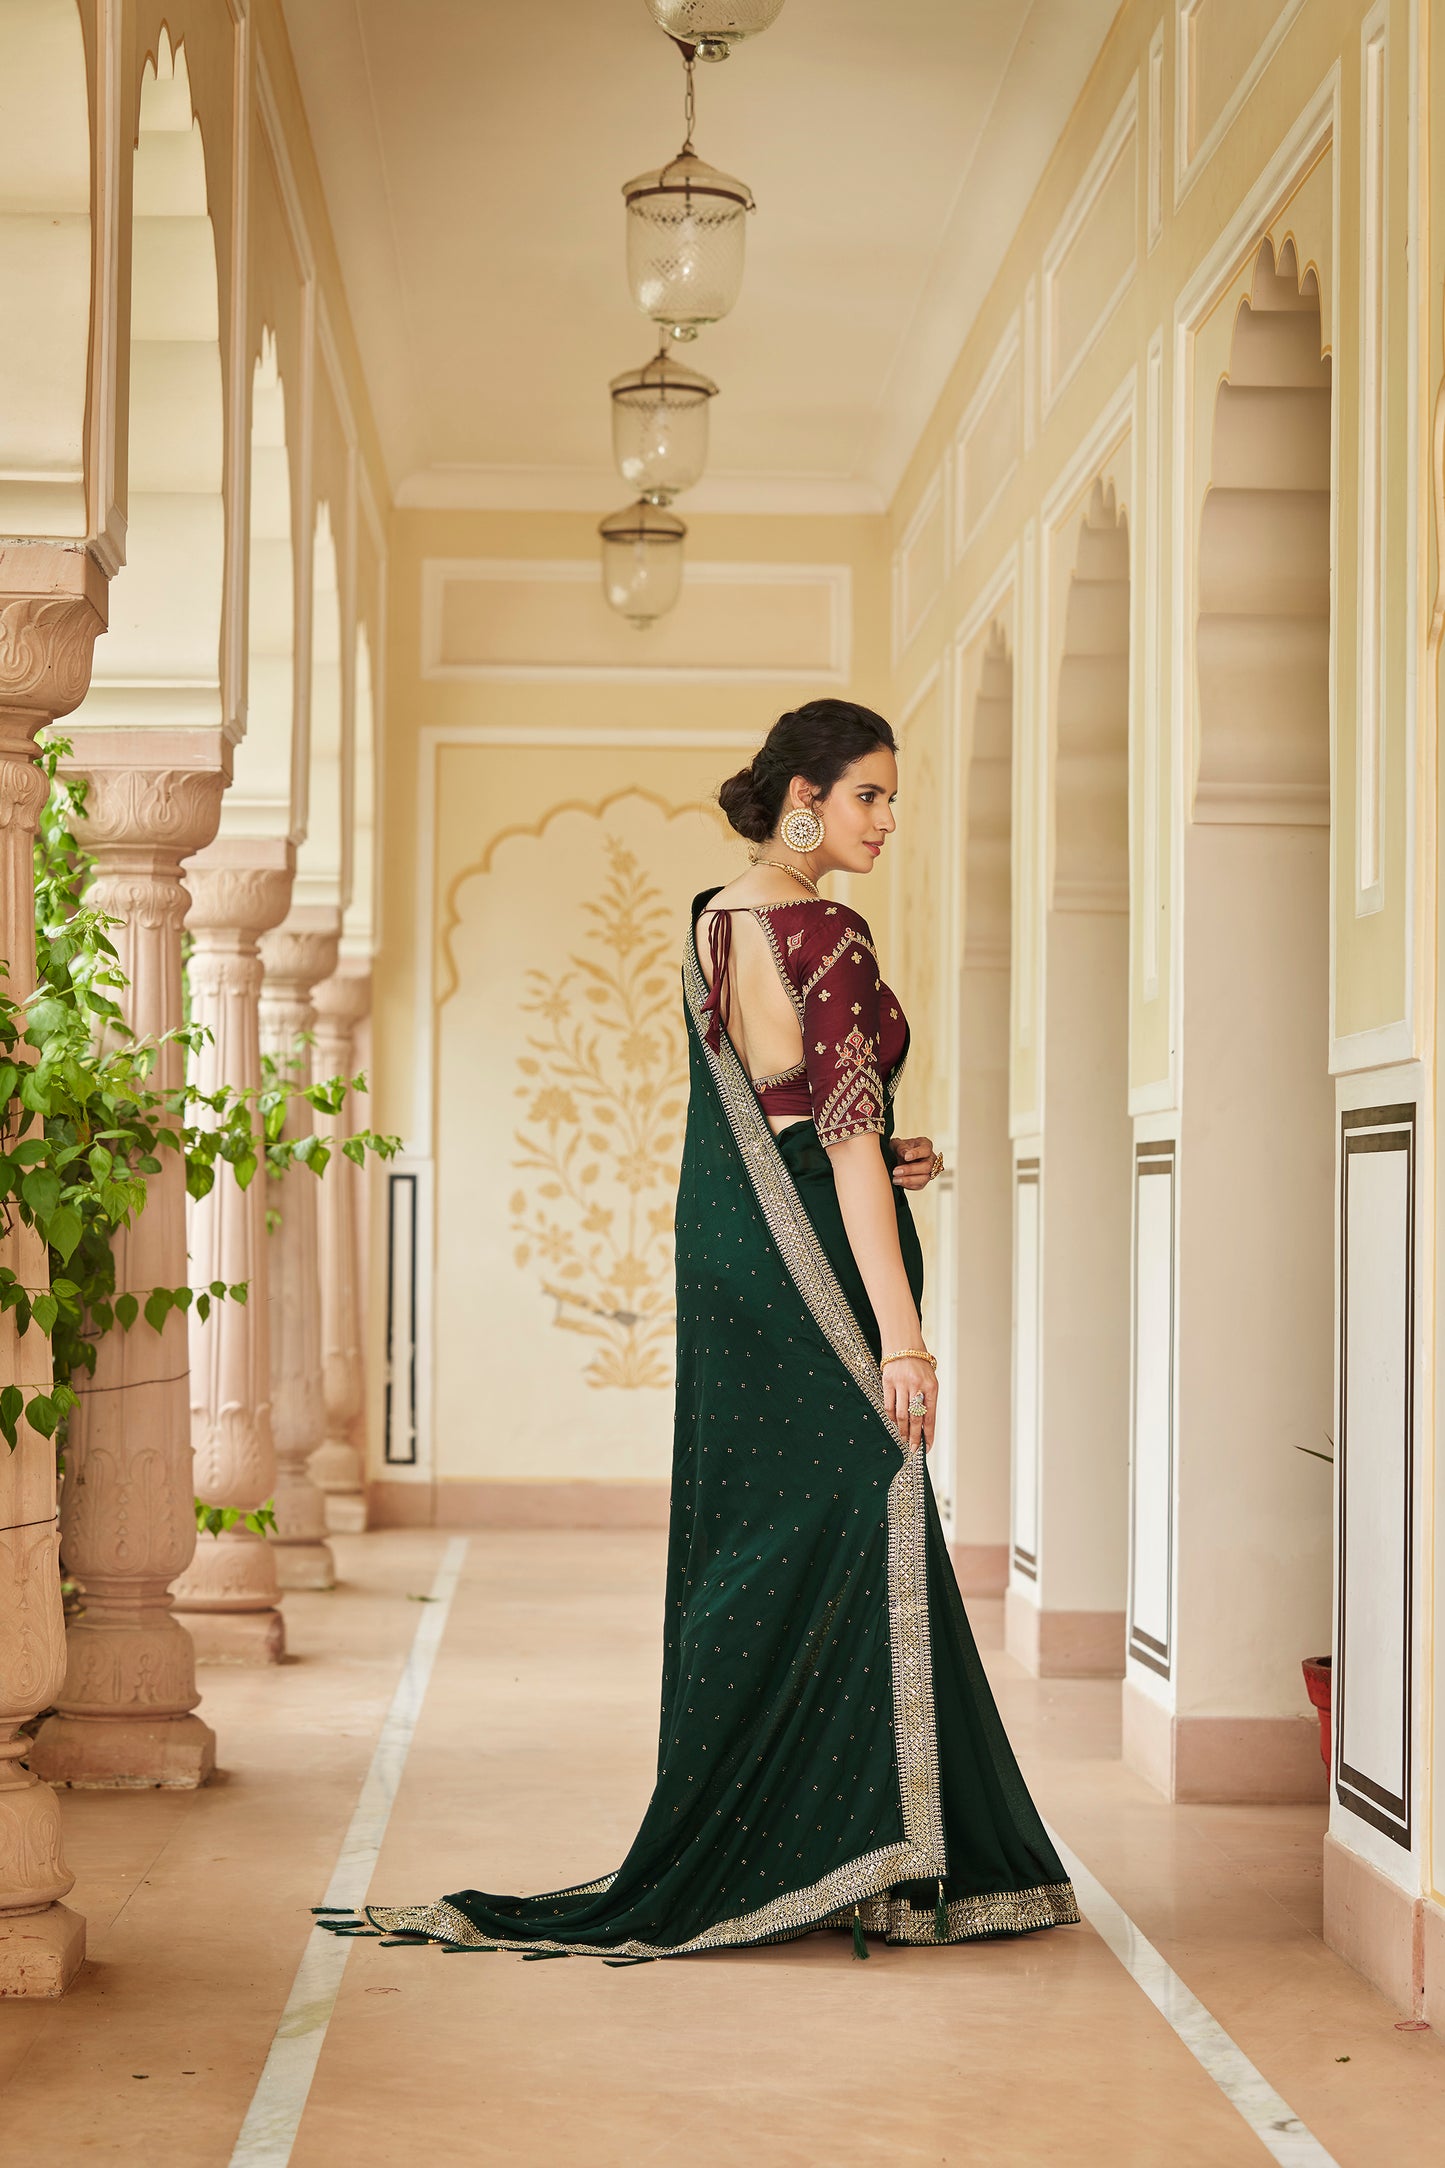 Amazing Drak Green Color Sequence Saree For Wedding Look